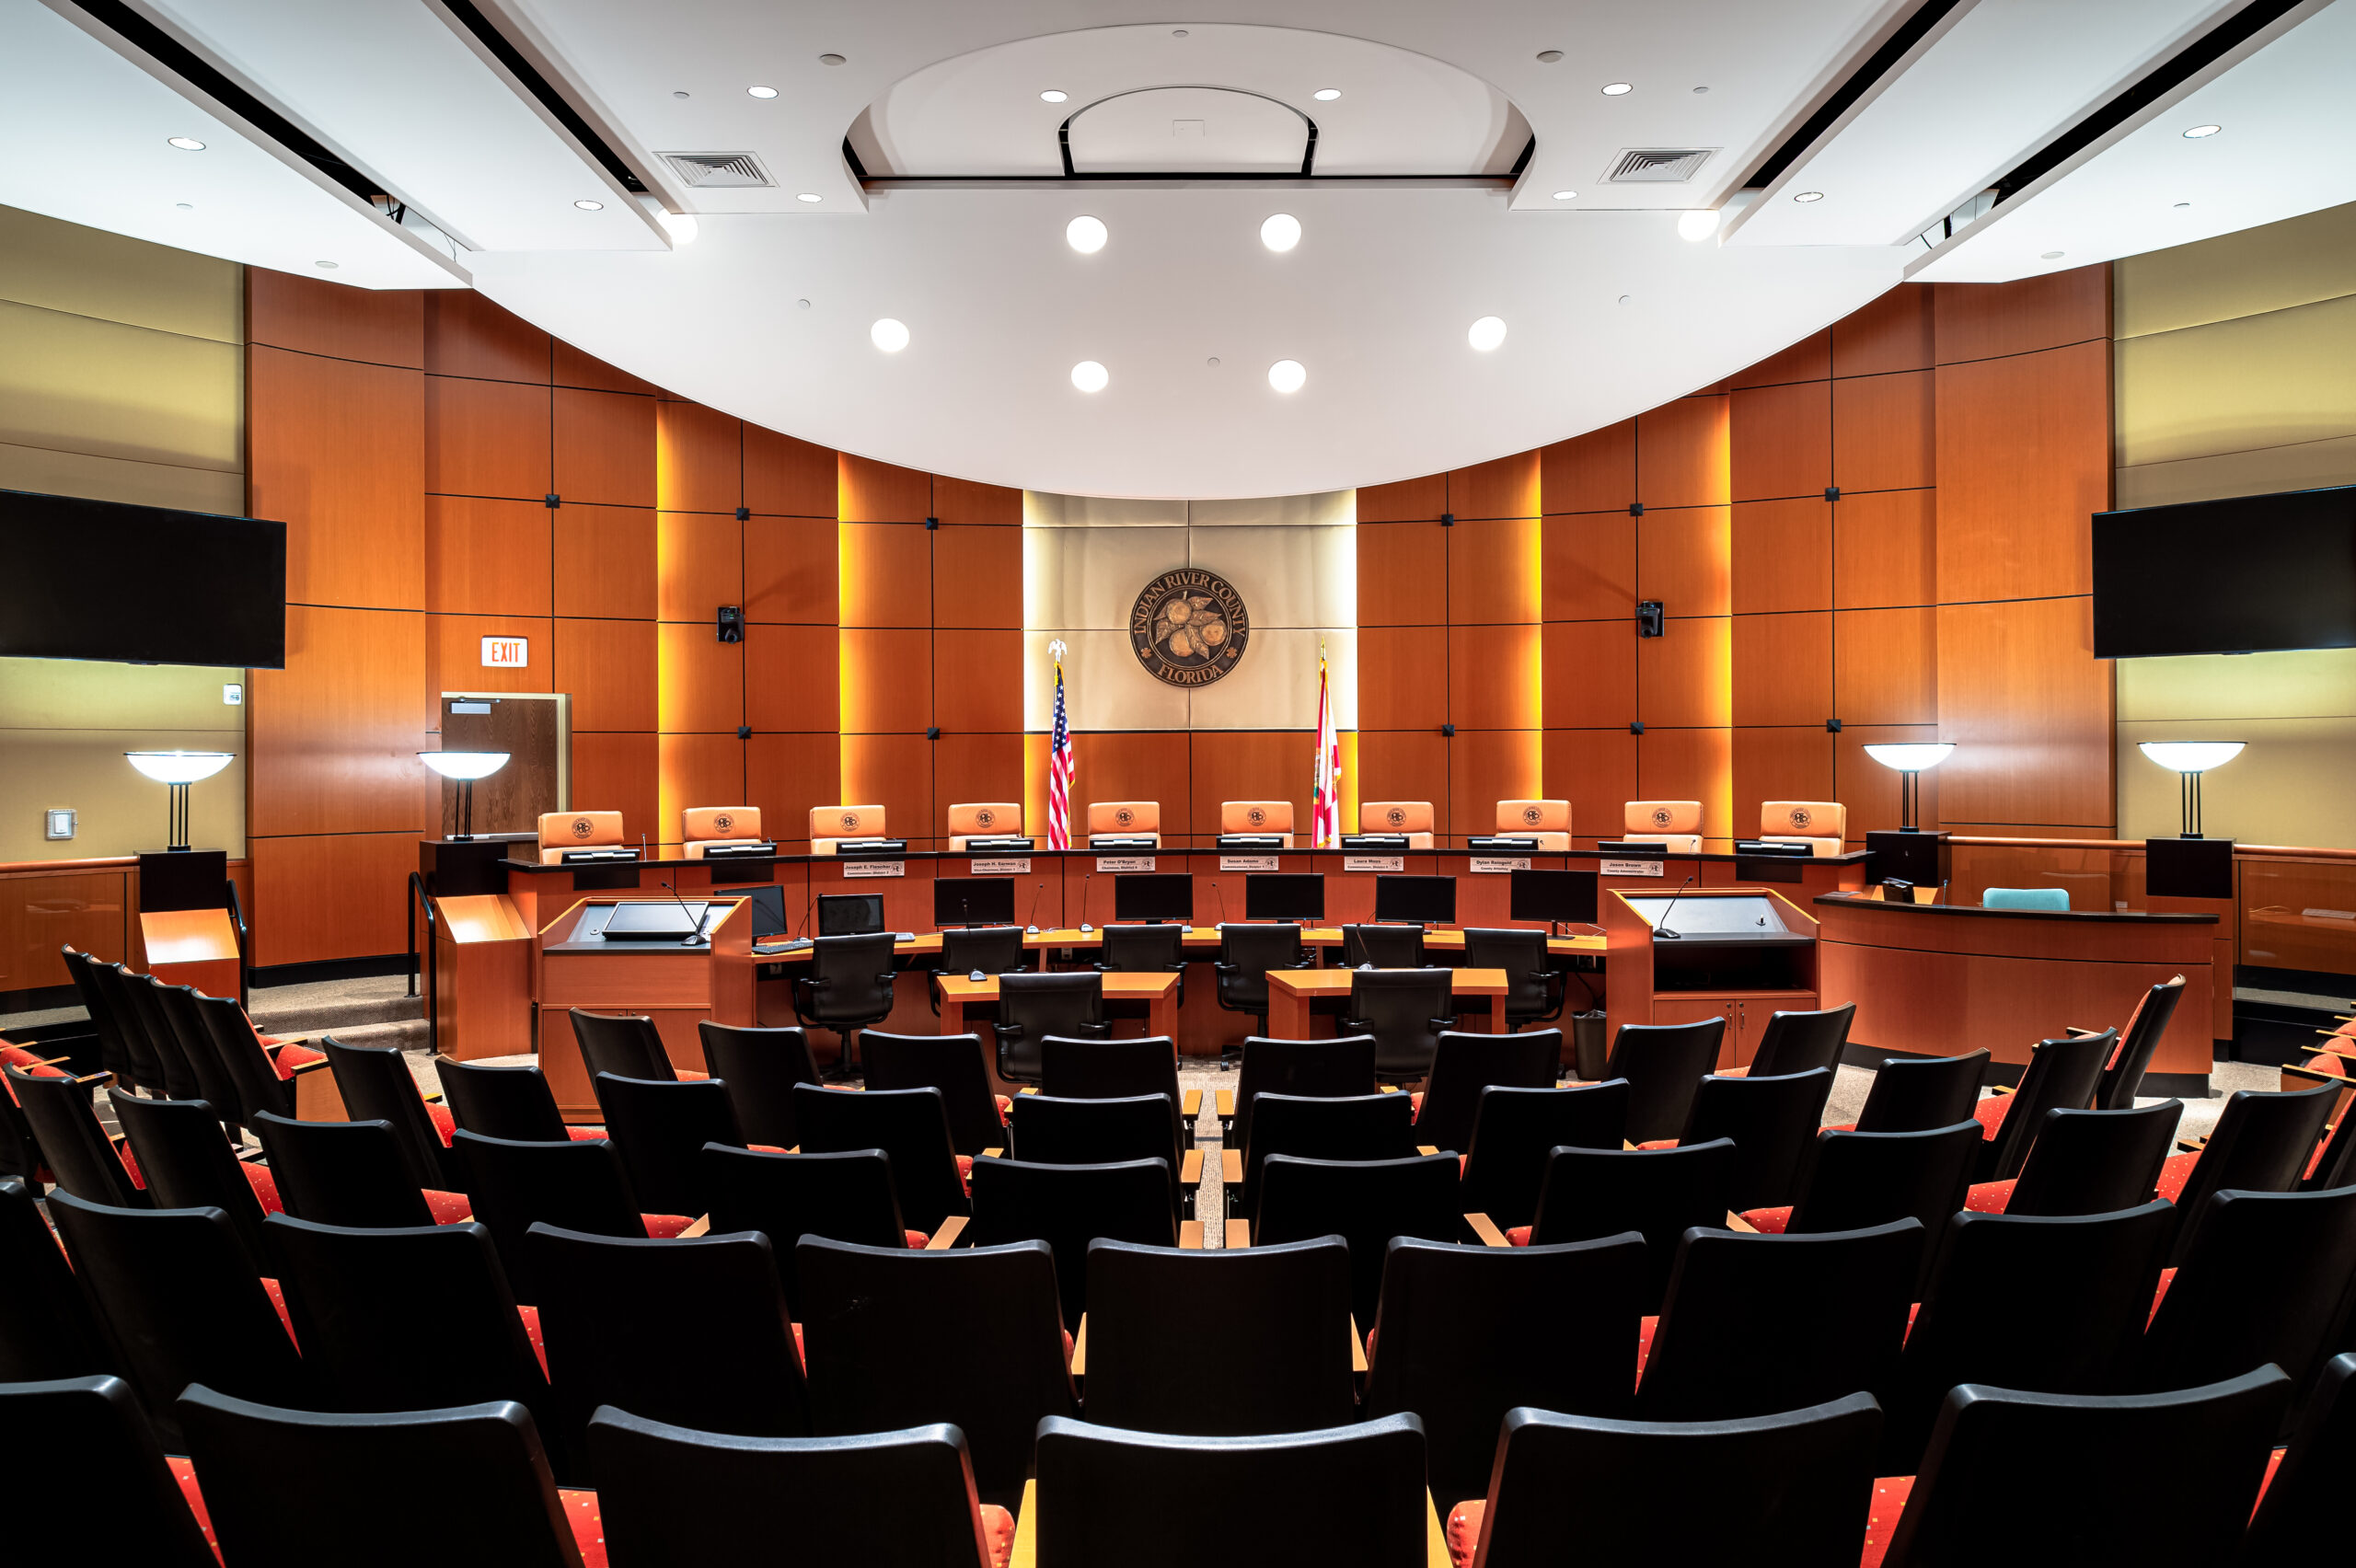 a professionally photographed empty courtroom by an interior design photographer based in North Carolina